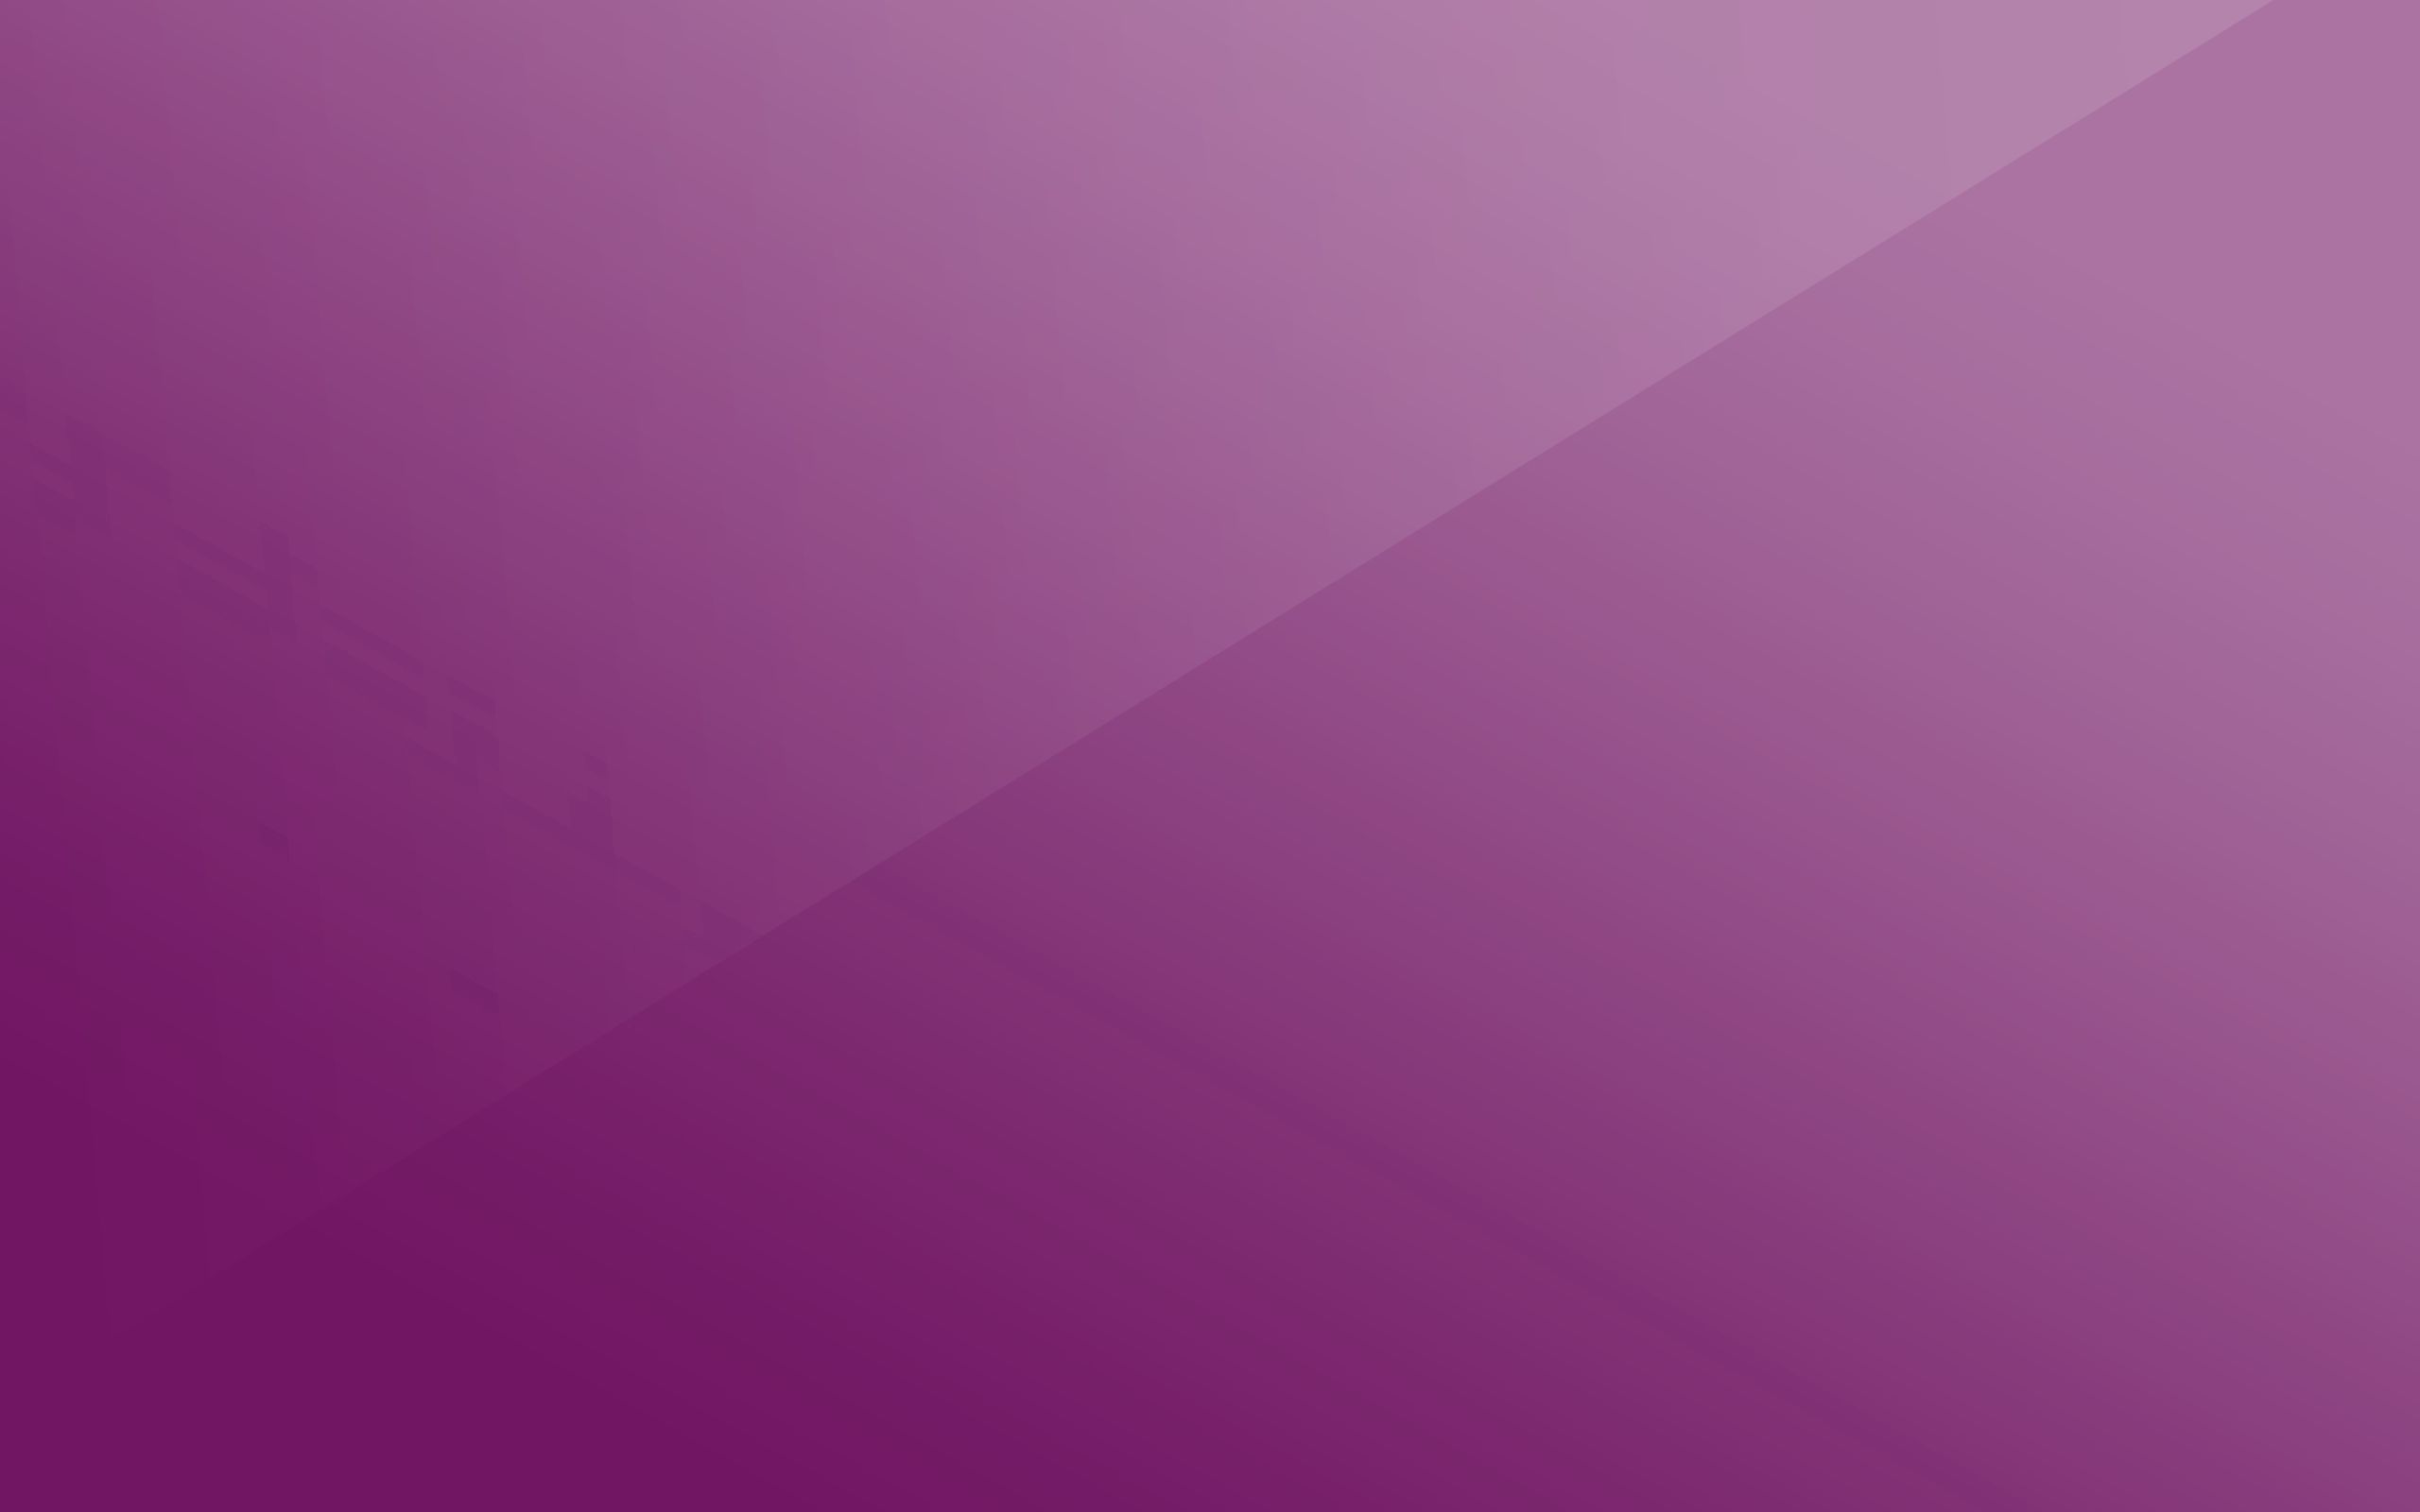 purple, abstract, light coloured, surface, background, violet, light, lines 5K